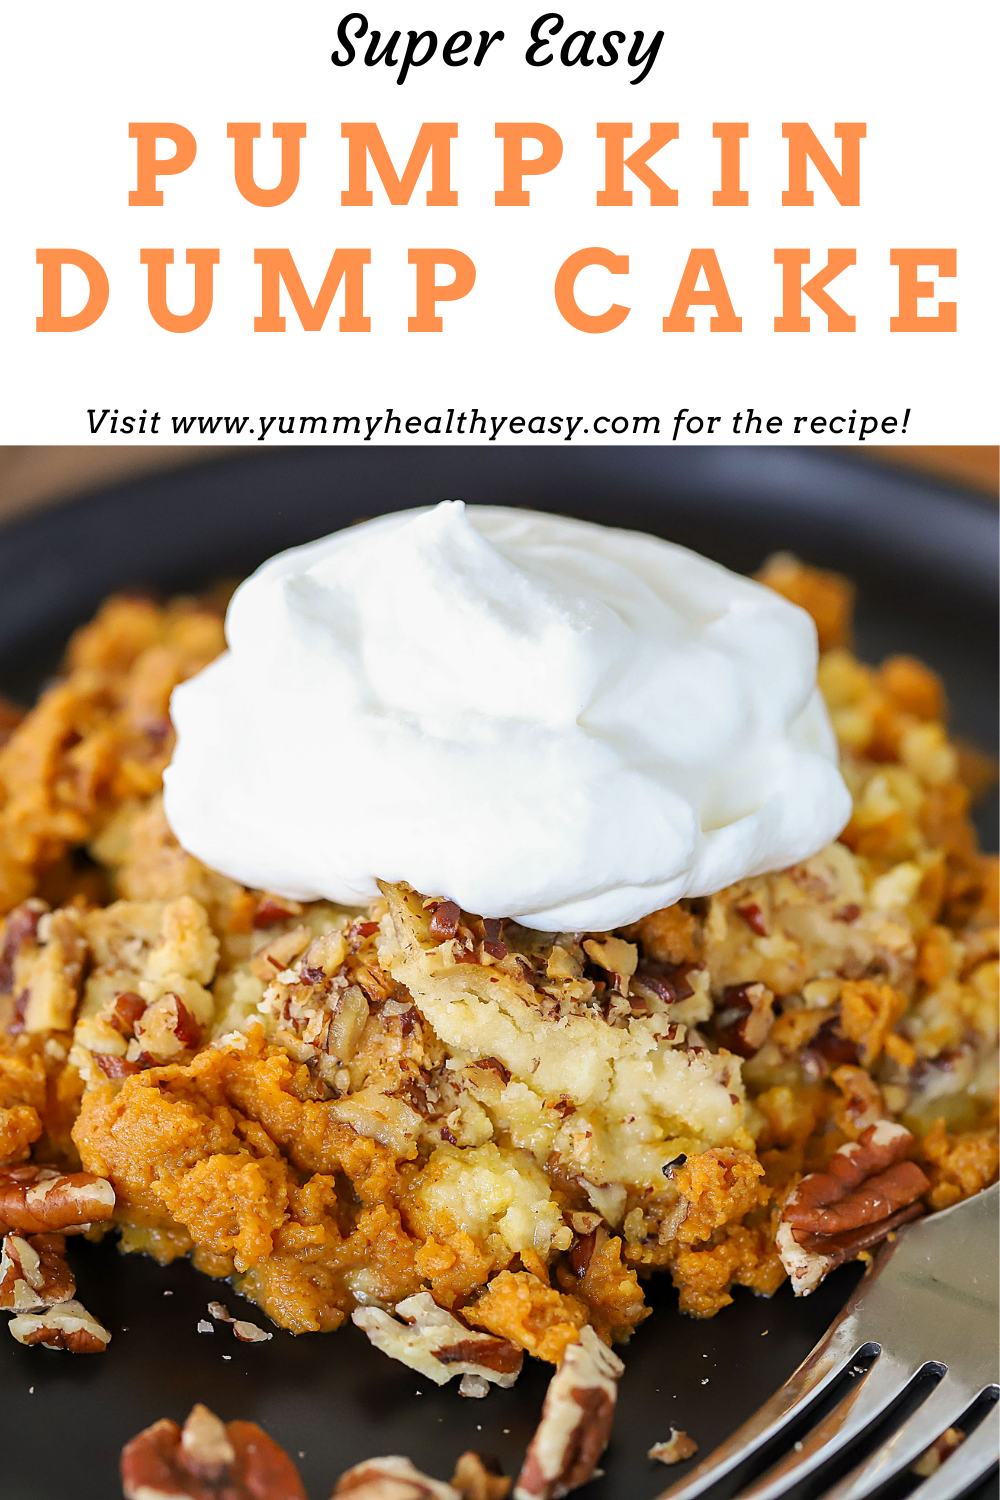 Ready for the best combination of flavors and textures? This Easy Pumpkin Dump Cake combines all the flavors of fall, only has a few ingredients, is quick to whip up and tastes incredible! via @jennikolaus